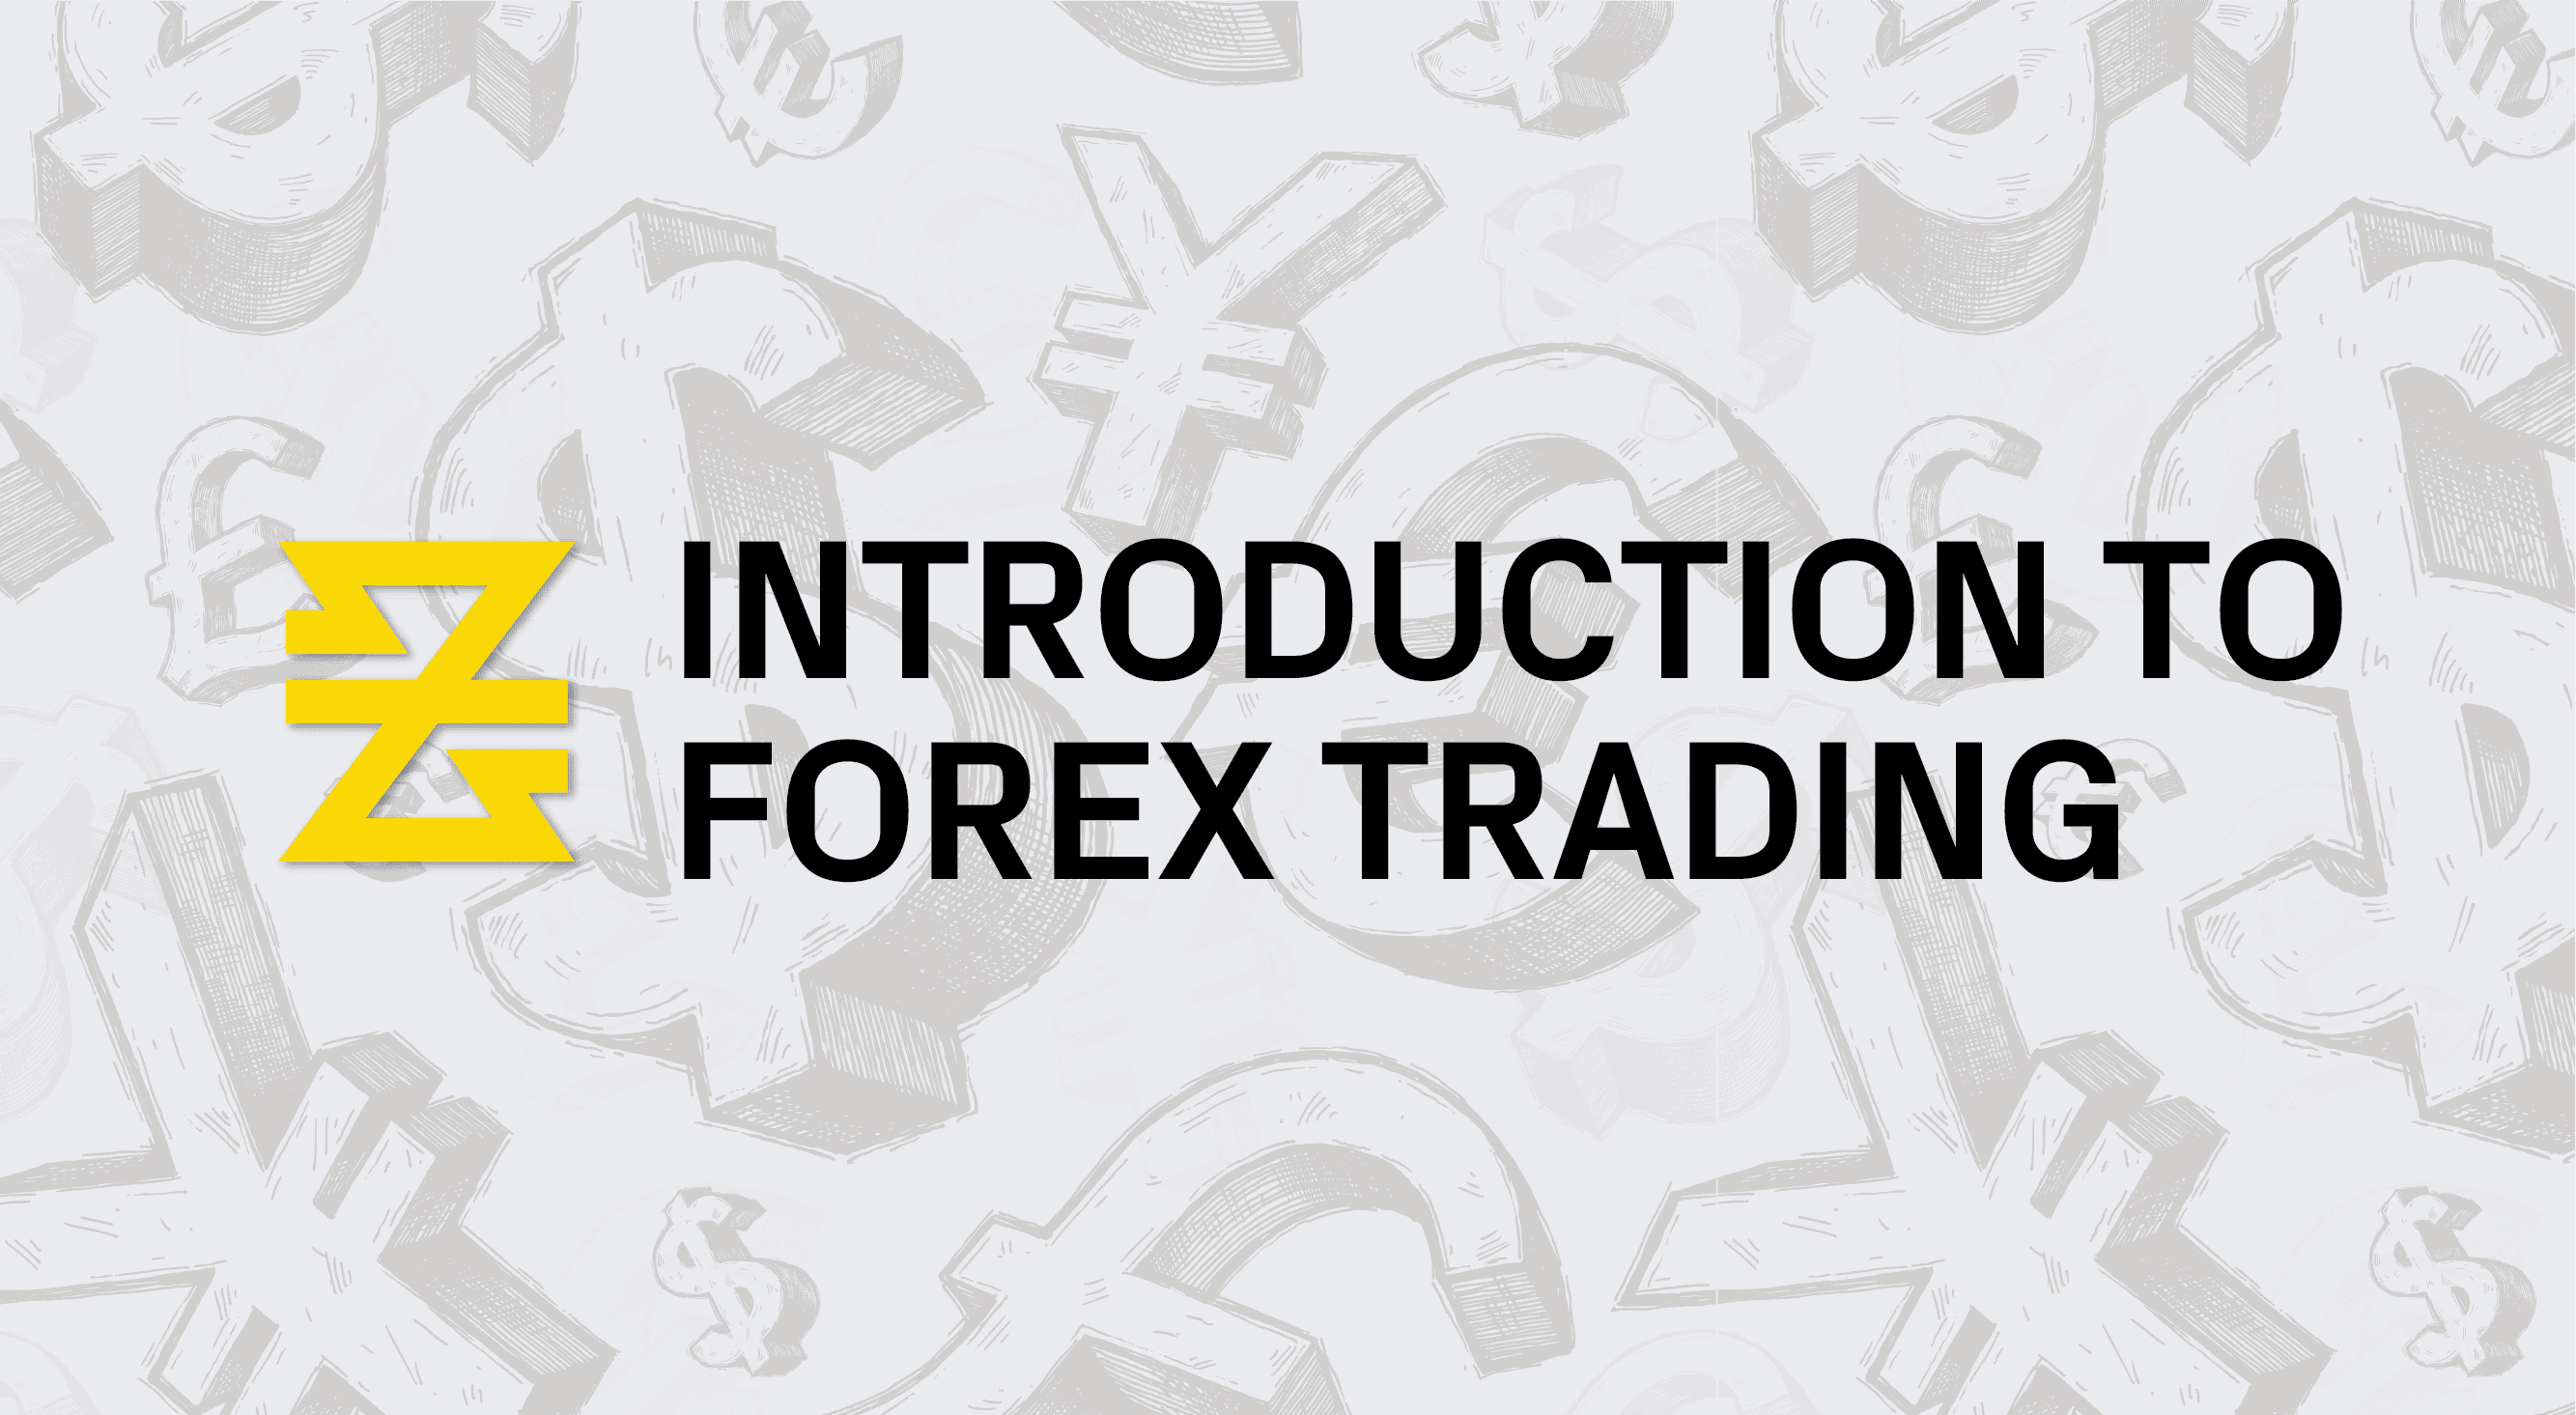 Introduction to Forex Trading - chapter - baxia markets